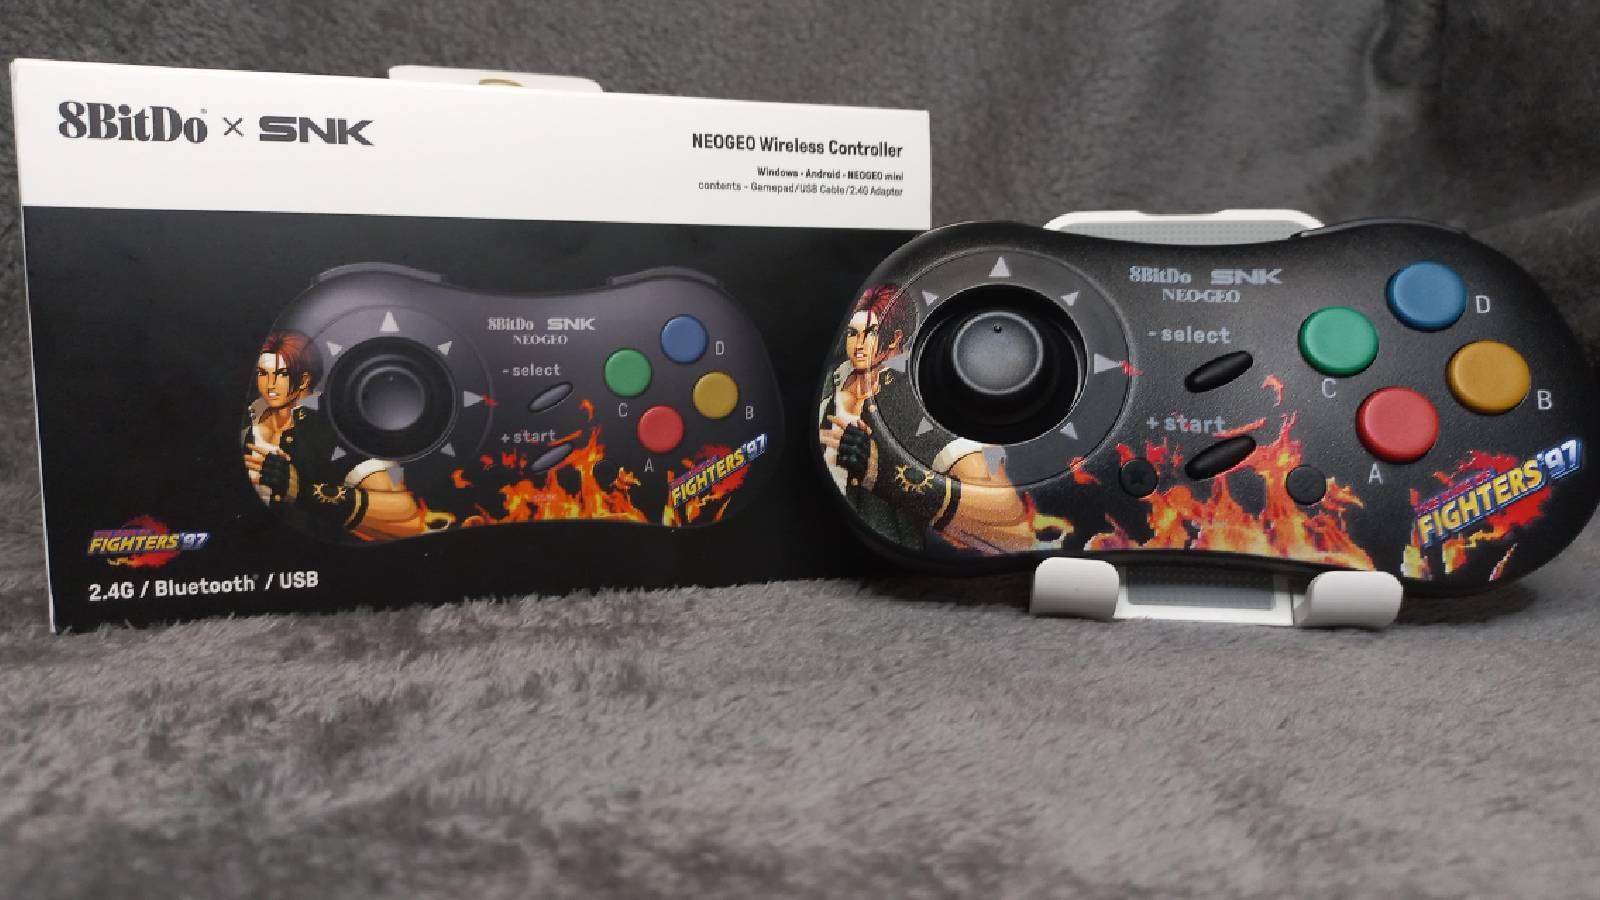 8BitDo NeoGeo controller King of the Fighters 97 edition header